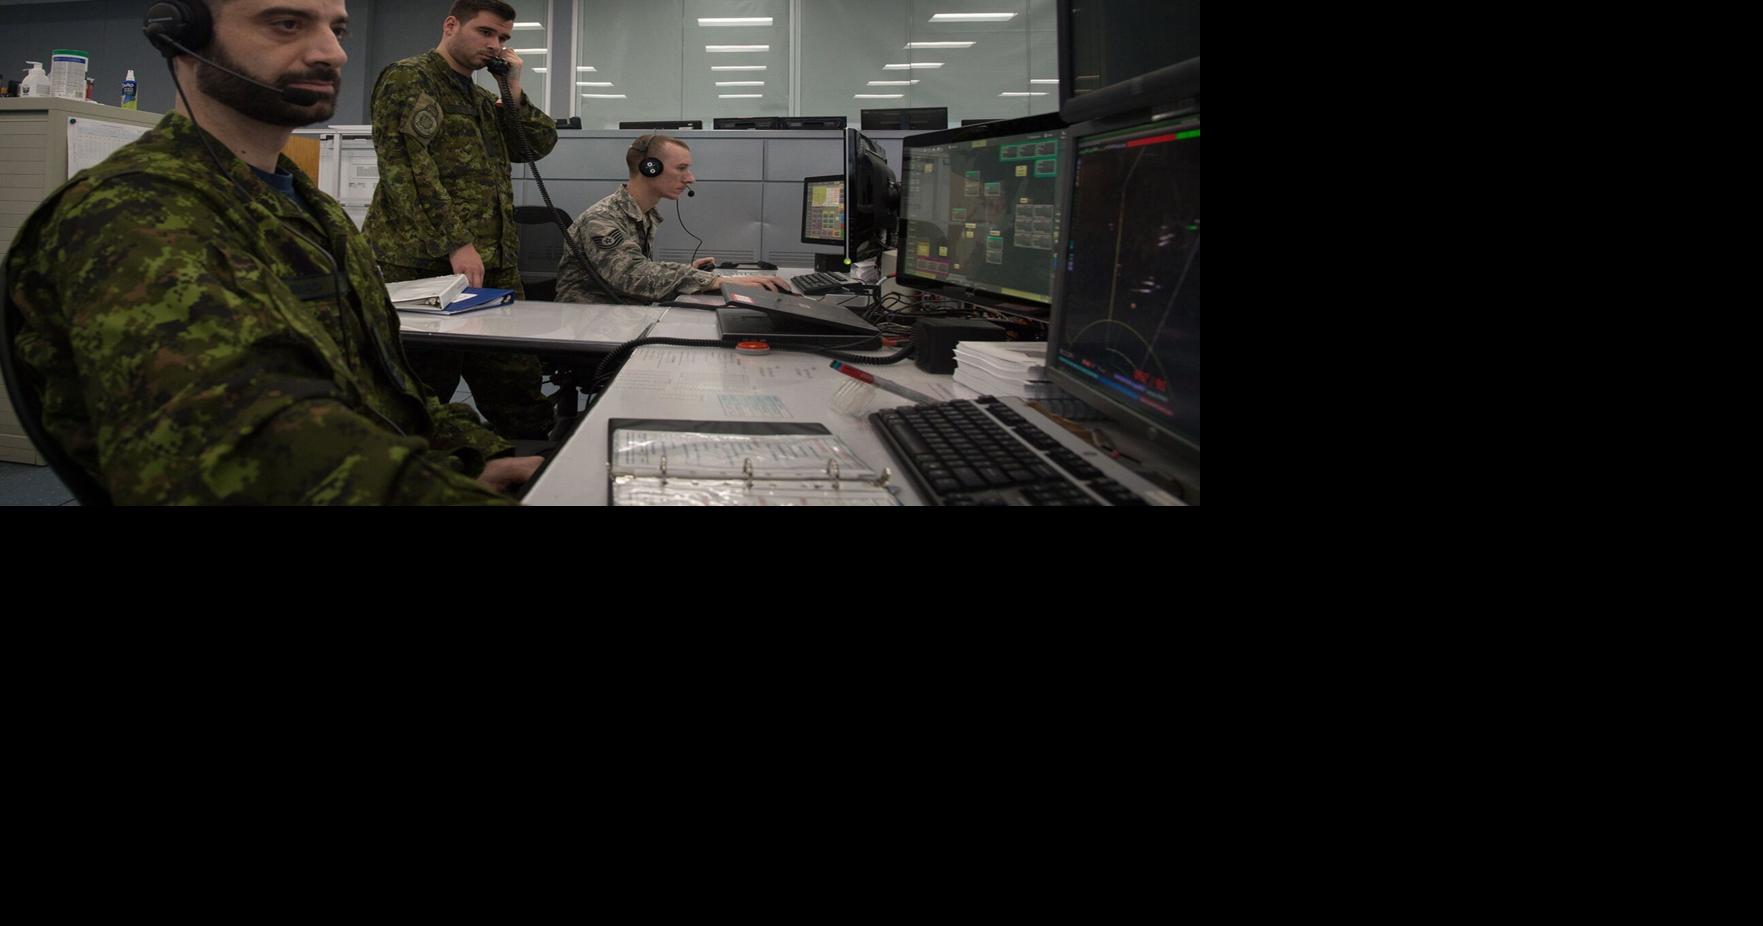 CFB North Bay unveils new technology to support 'no-fail' mission to defend  skies